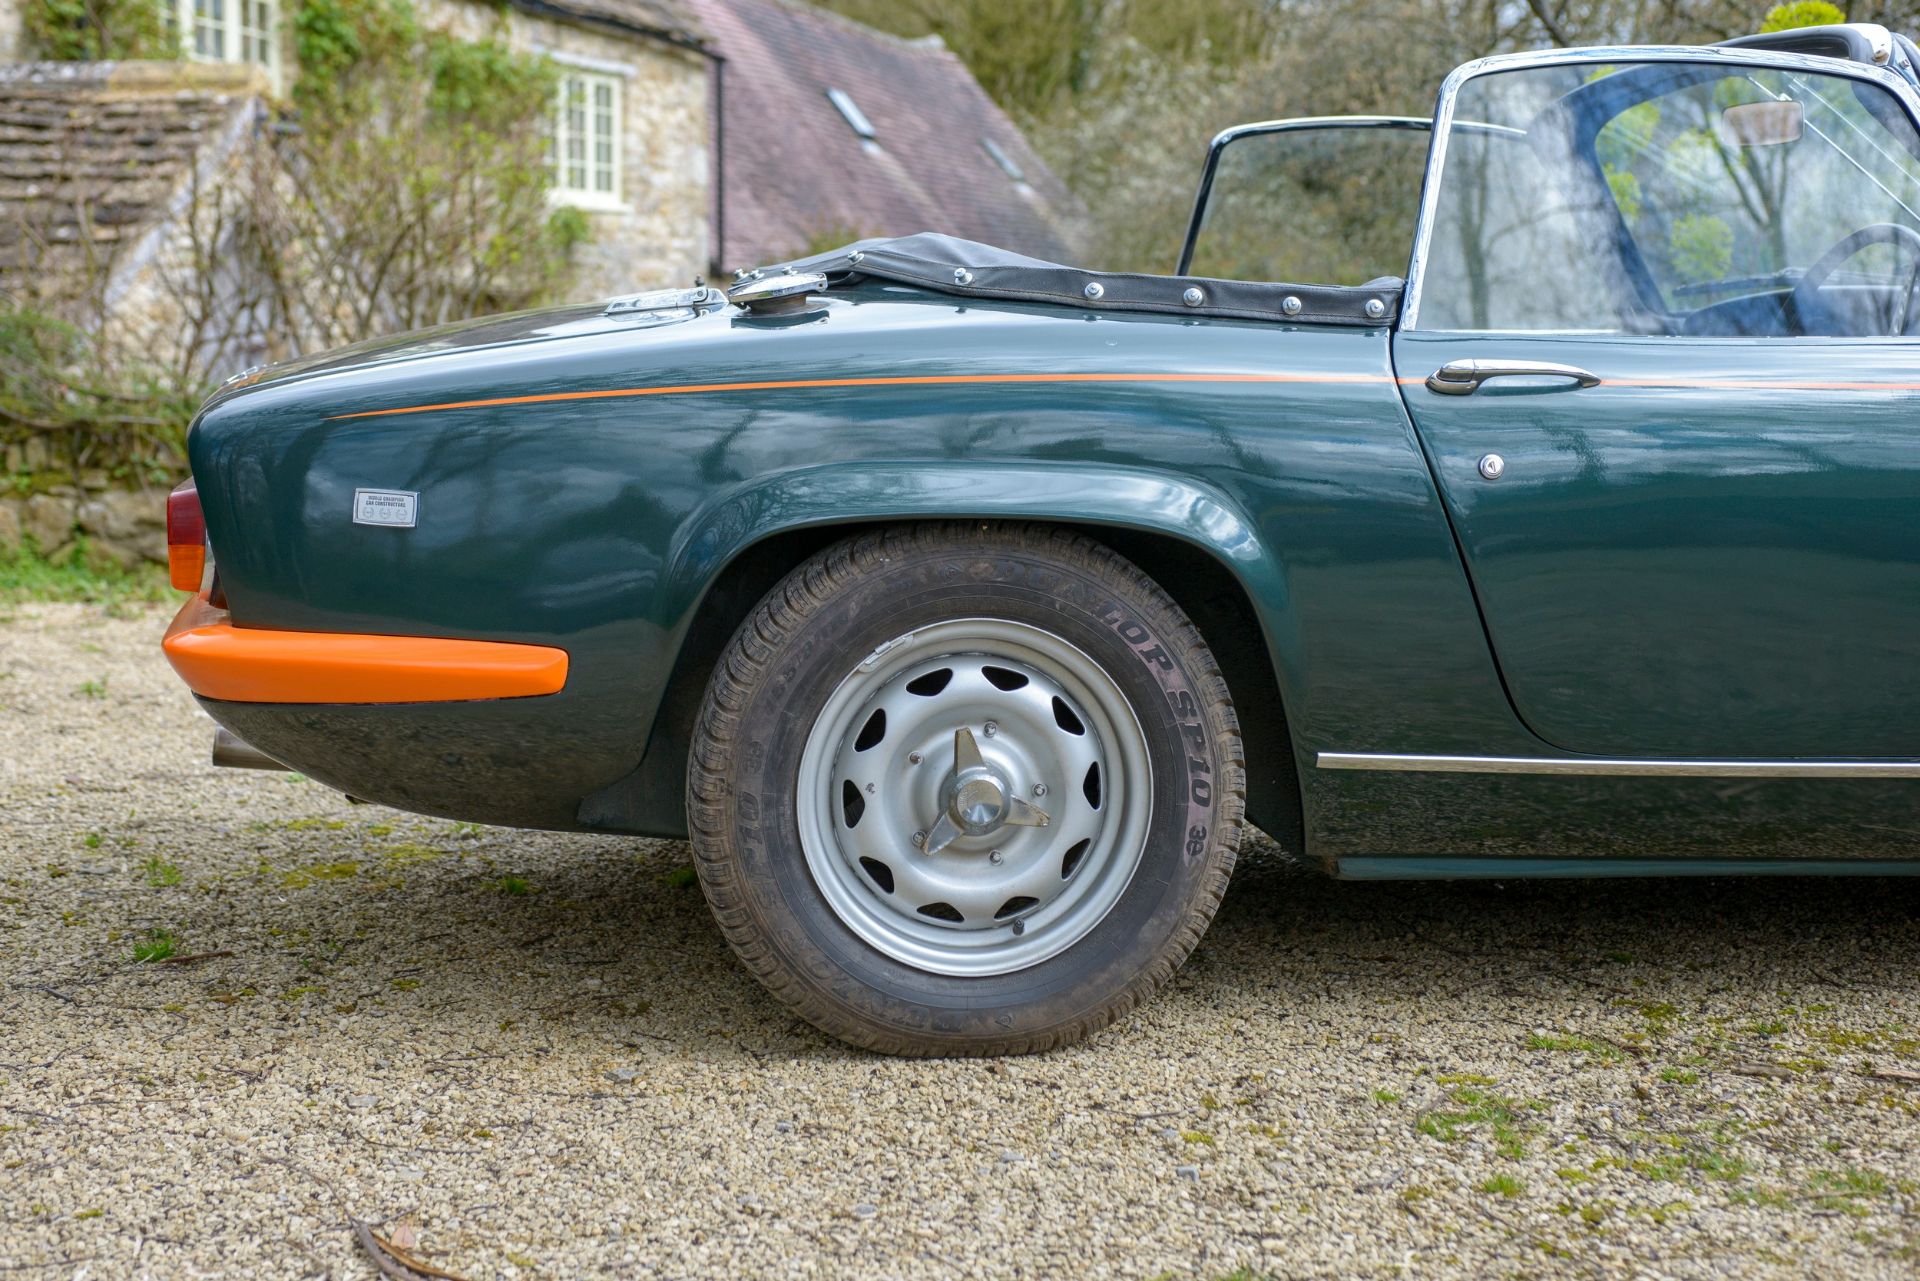 1969 LOTUS ELAN SERIES 4 BRM DROPHEAD COUPE Chassis Number: 45/9498 Registration Number: UJB 829H - Image 12 of 33